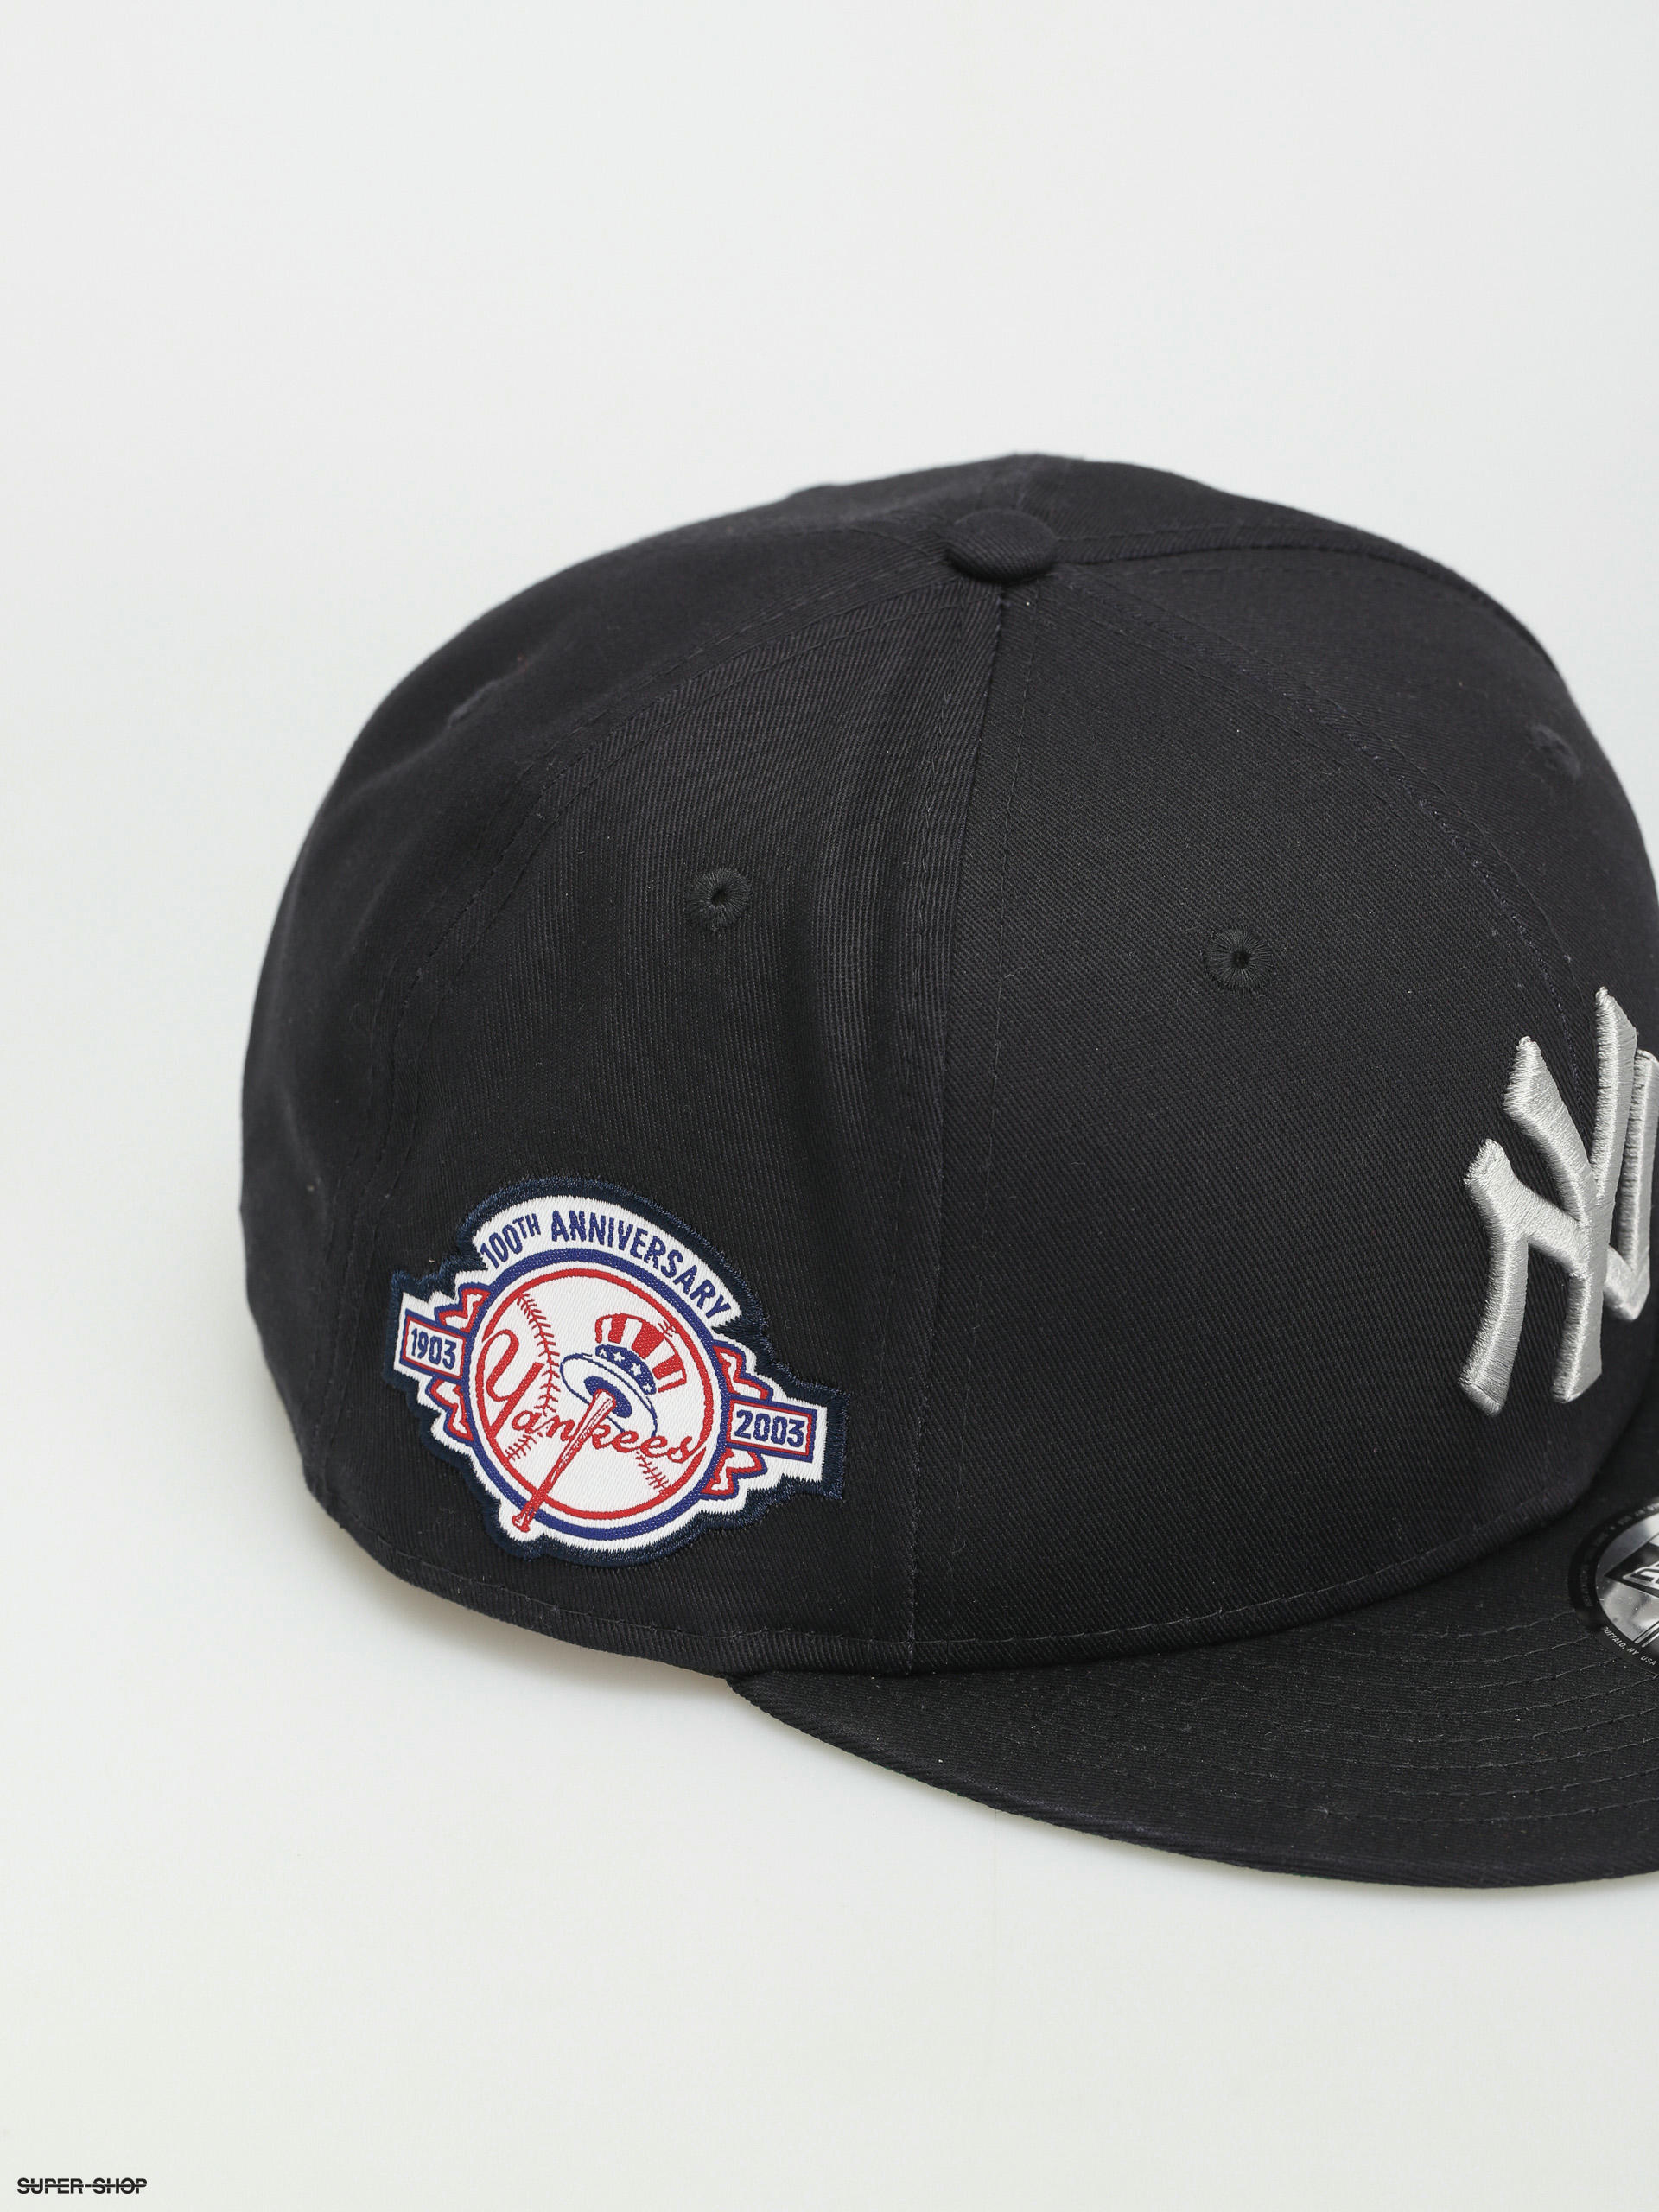 Casquettes New Era New York Yankees Contrast Side Patch 9Fifty Snapback Cap  Gray/ Navy